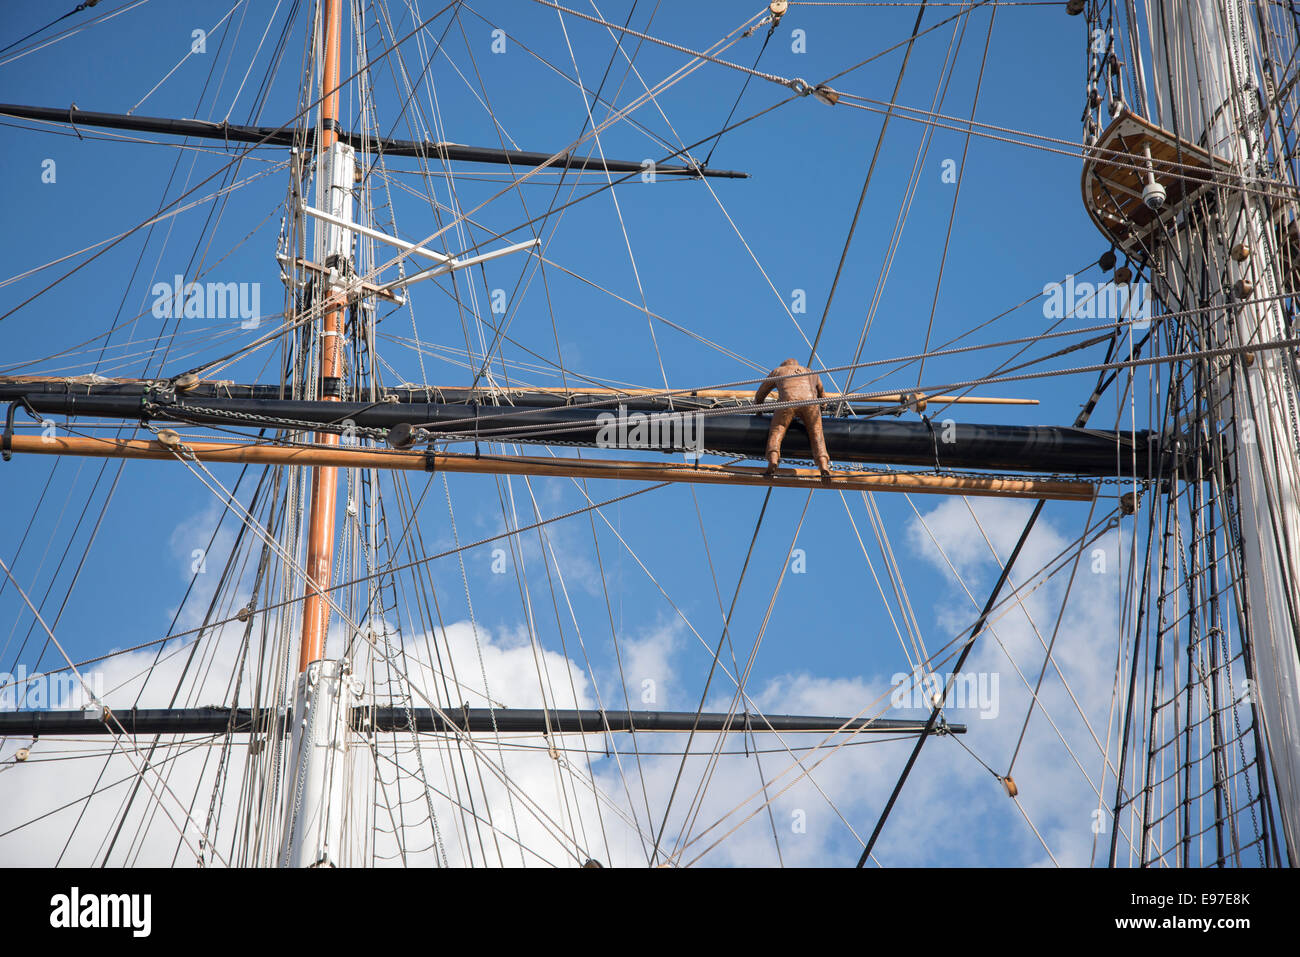 Masts and rigging of the British tea clipper The Cutty Sark at Greenwich, London, UK Stock Photo